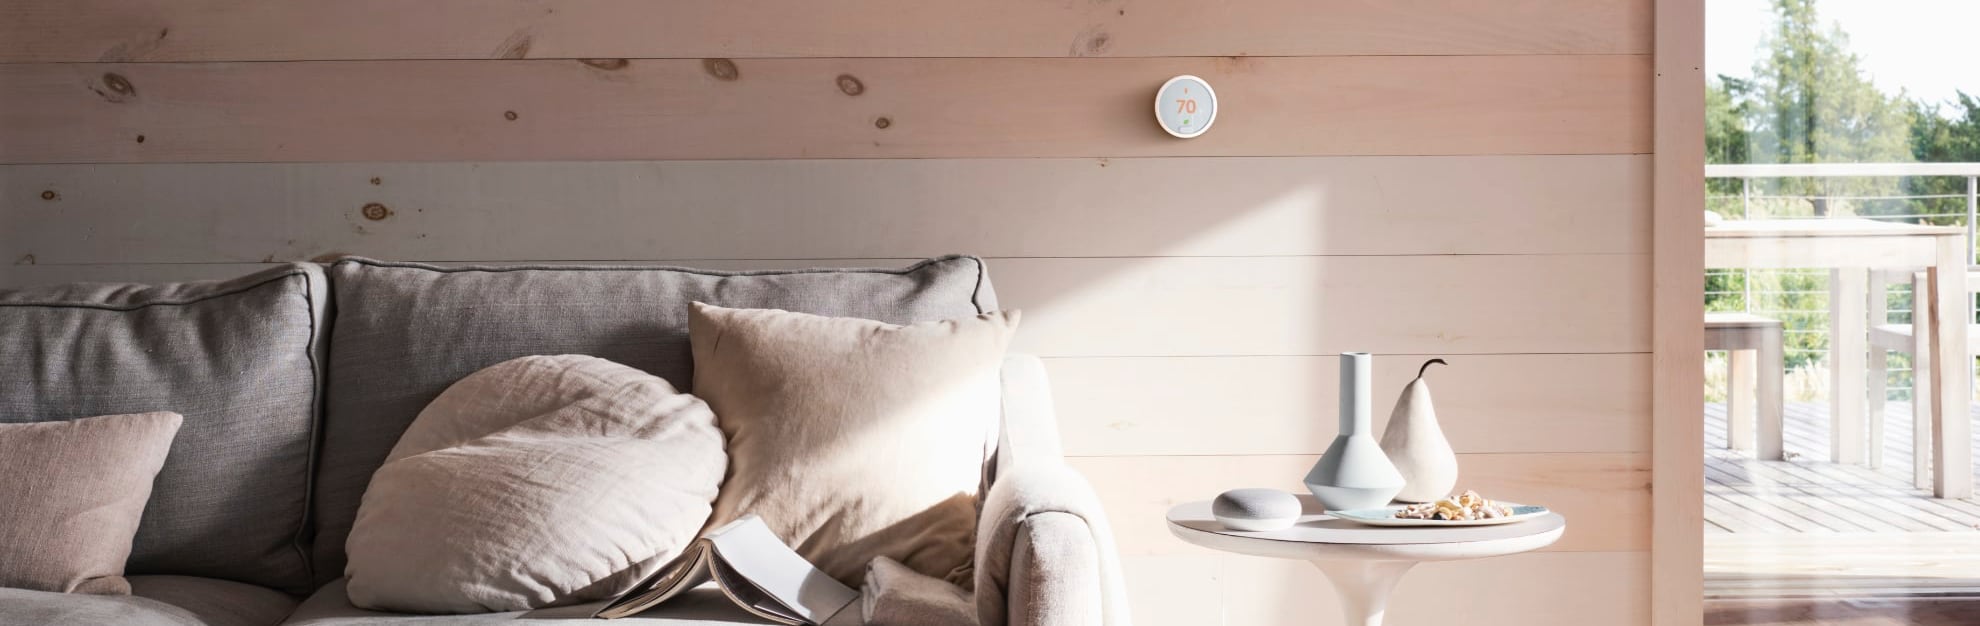 Vivint Home Automation in Concord